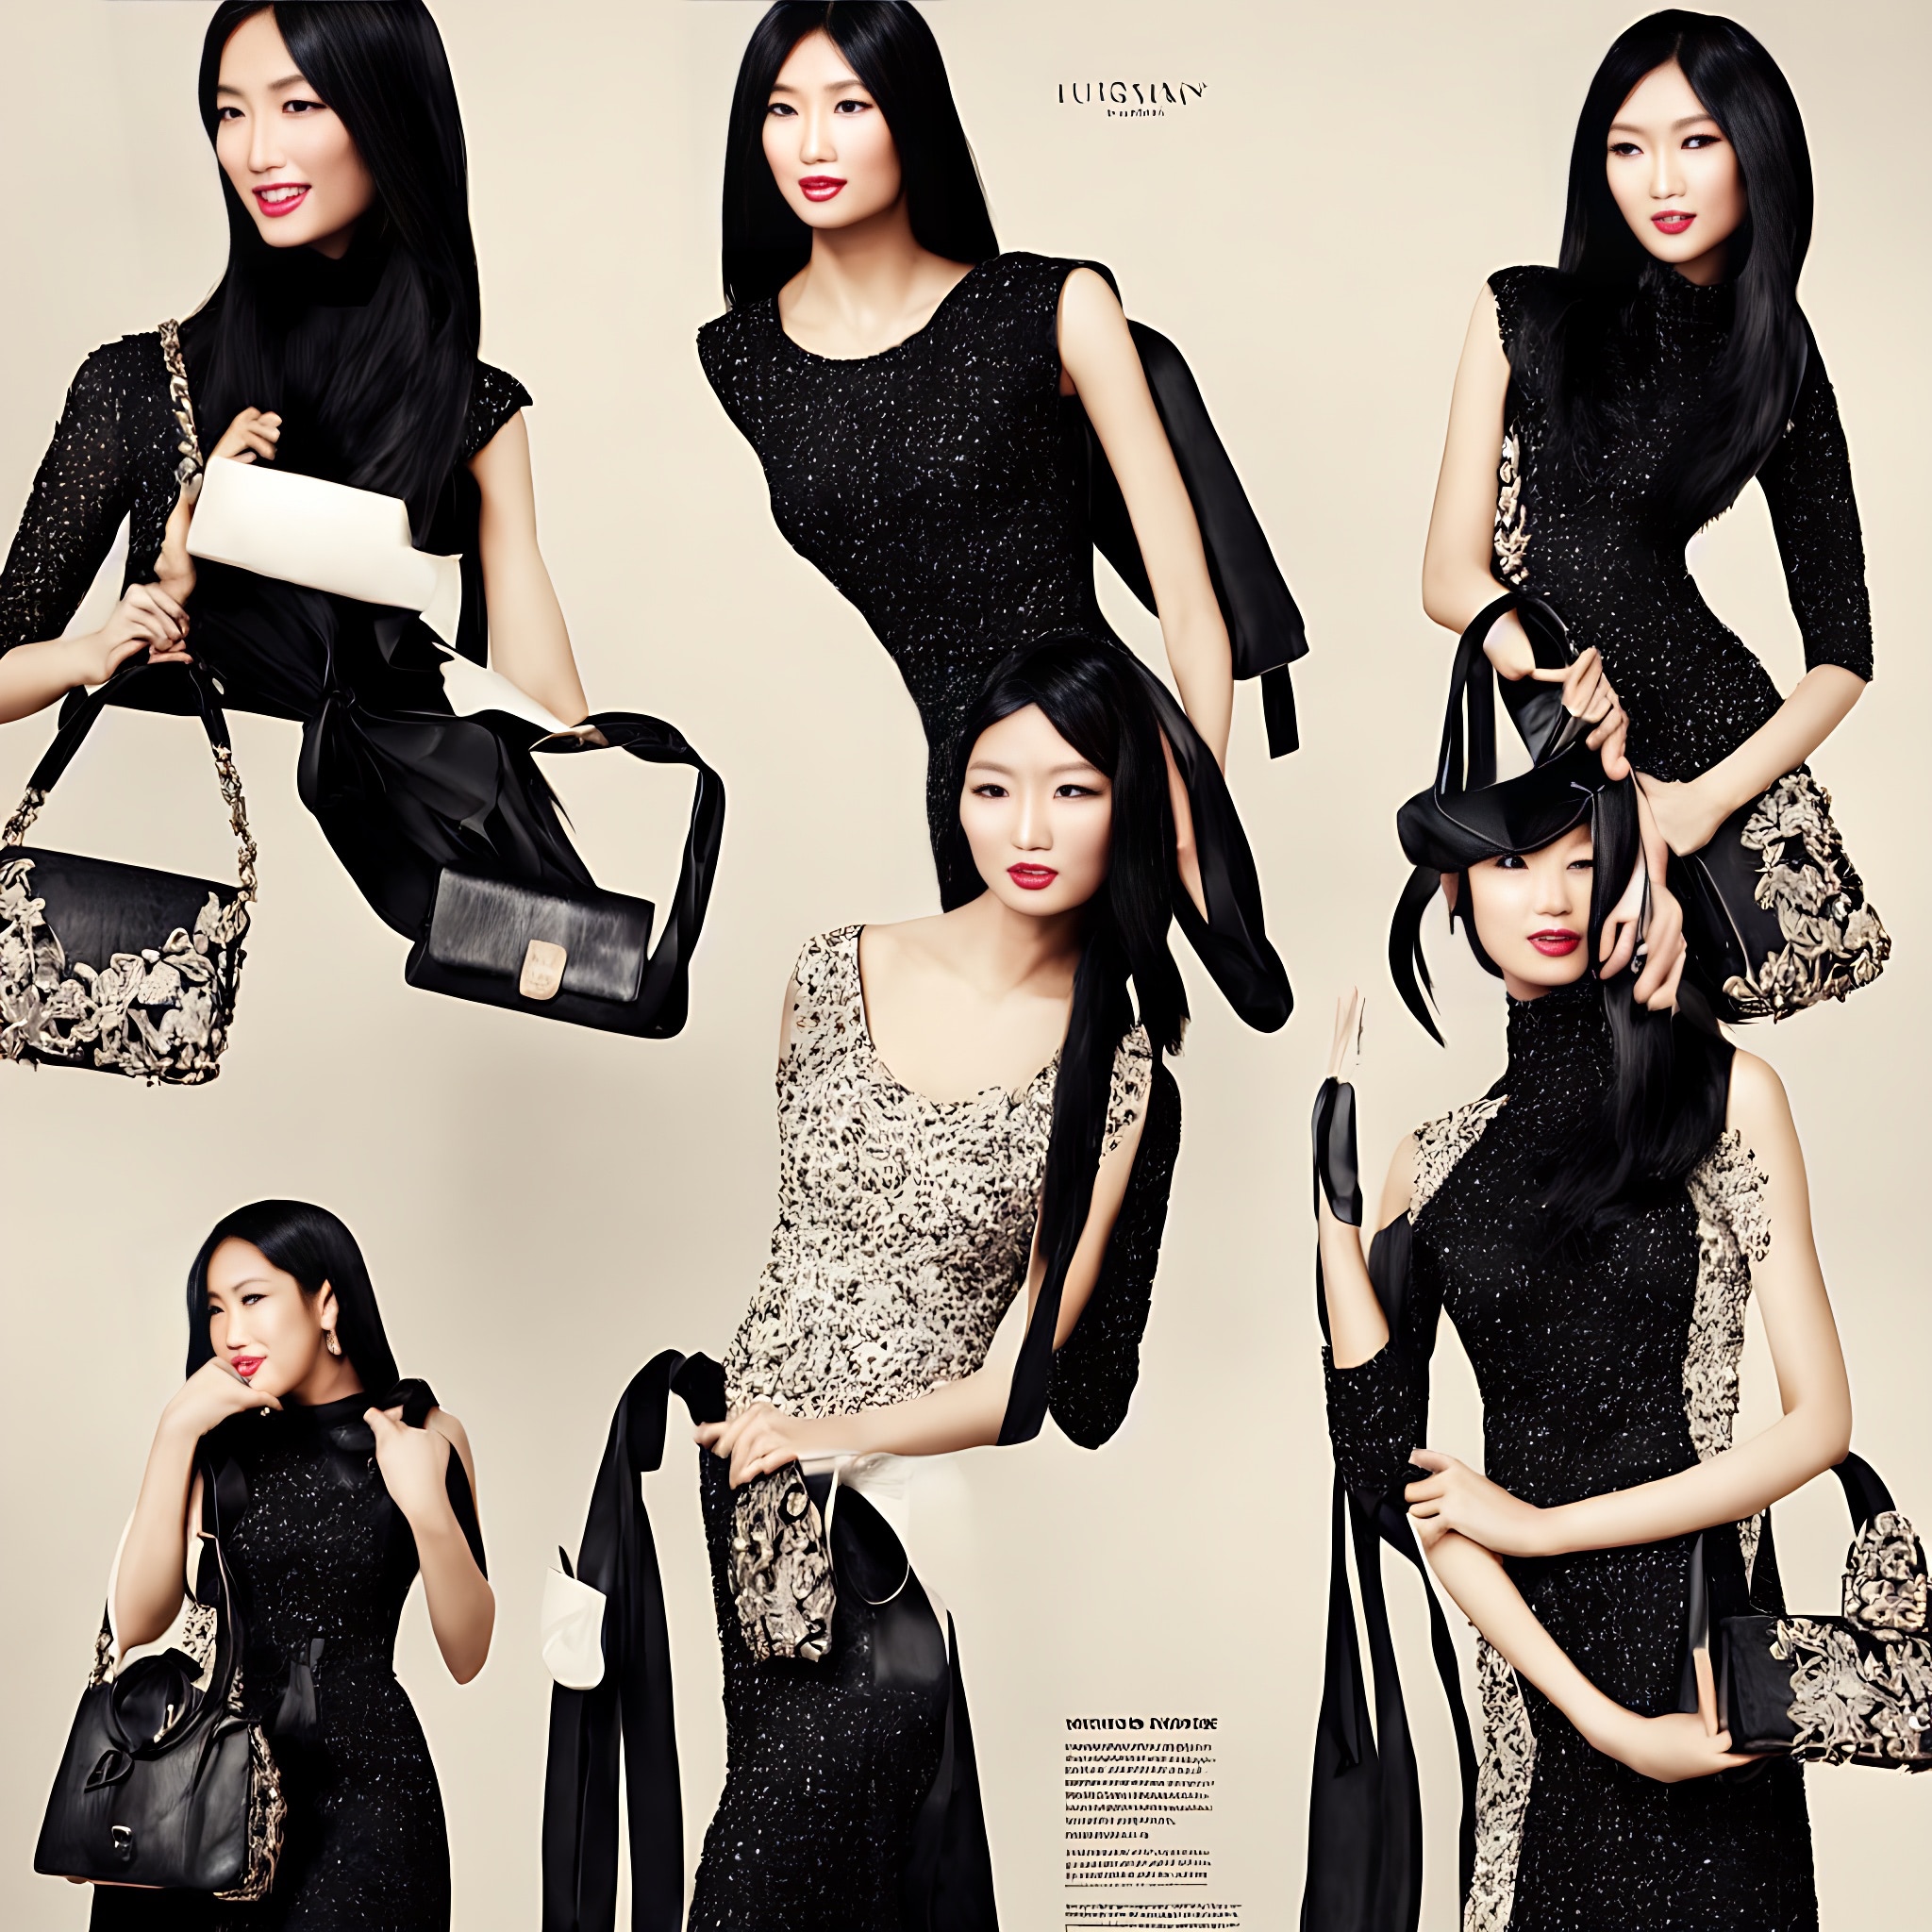 asian-fashion-advertisement-in-the-2010s-1